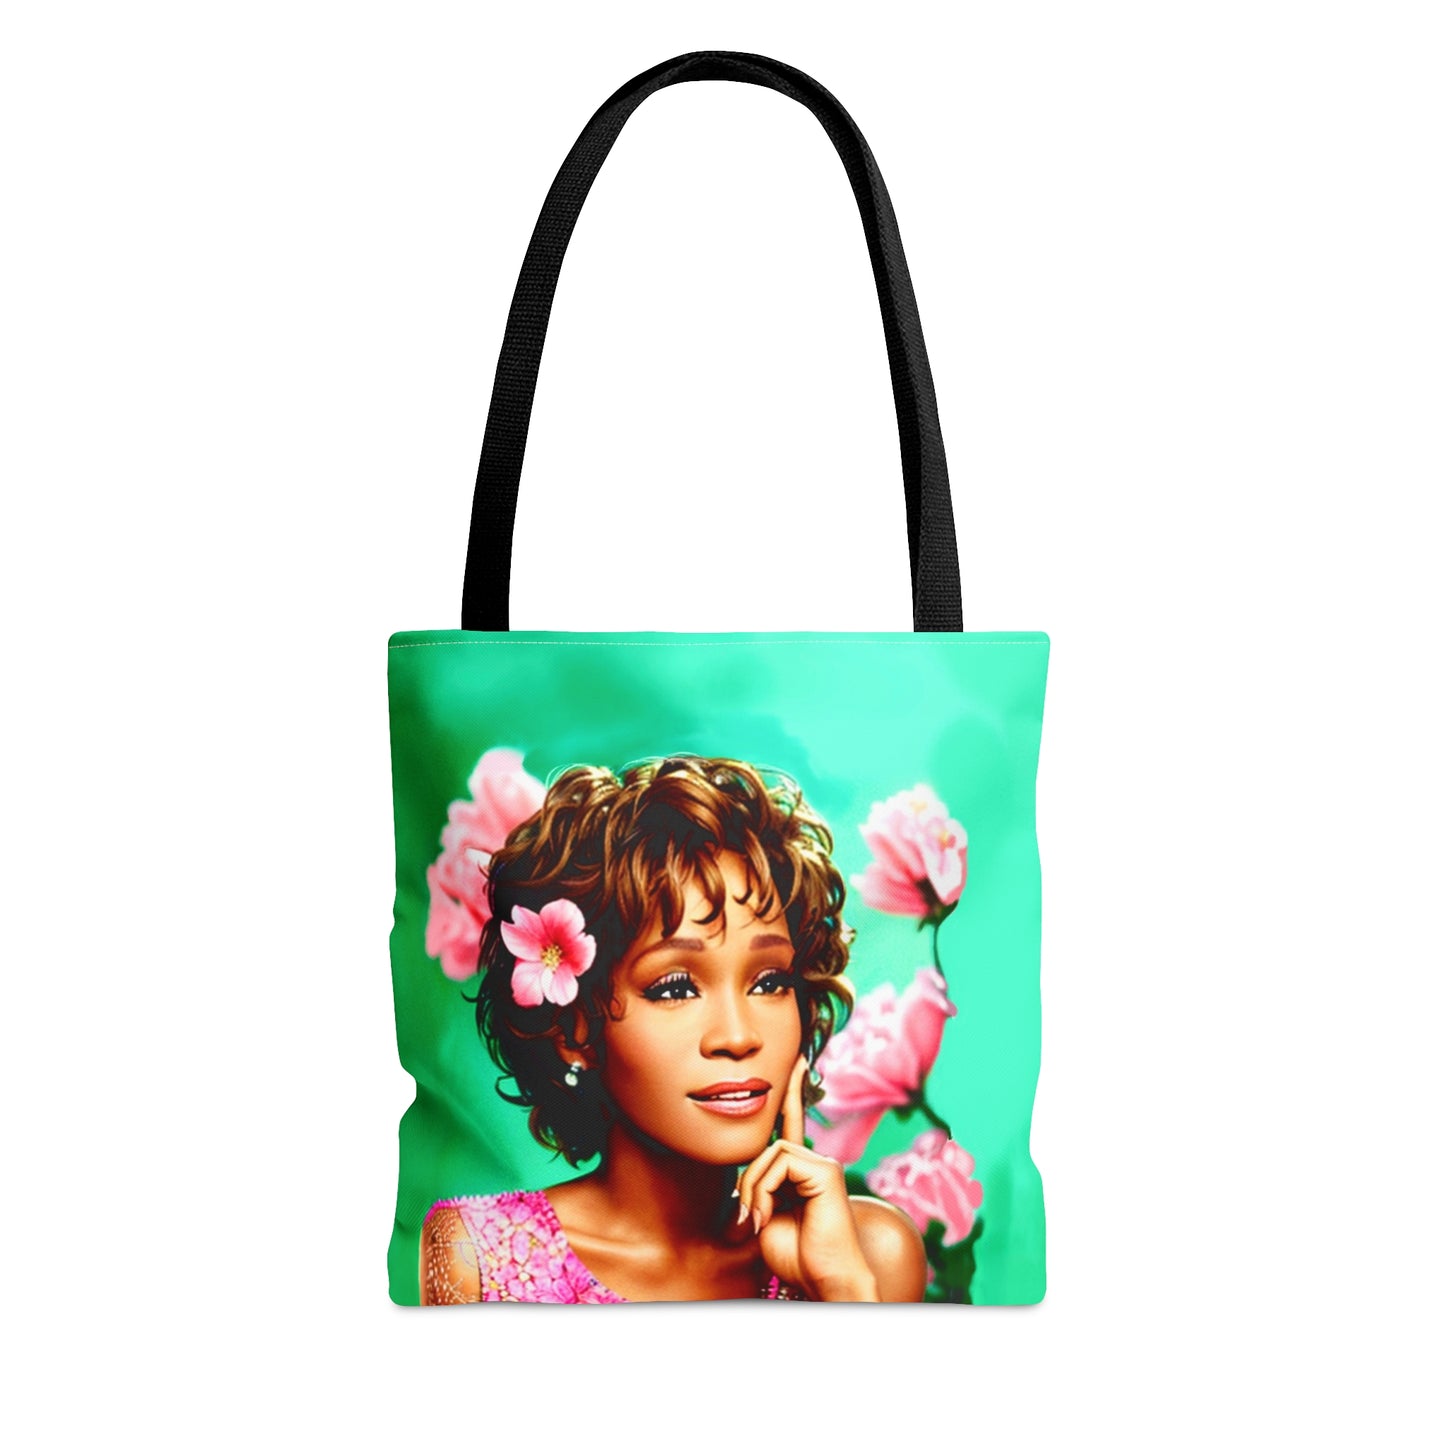 I Will Always Love You Celebrity Tote